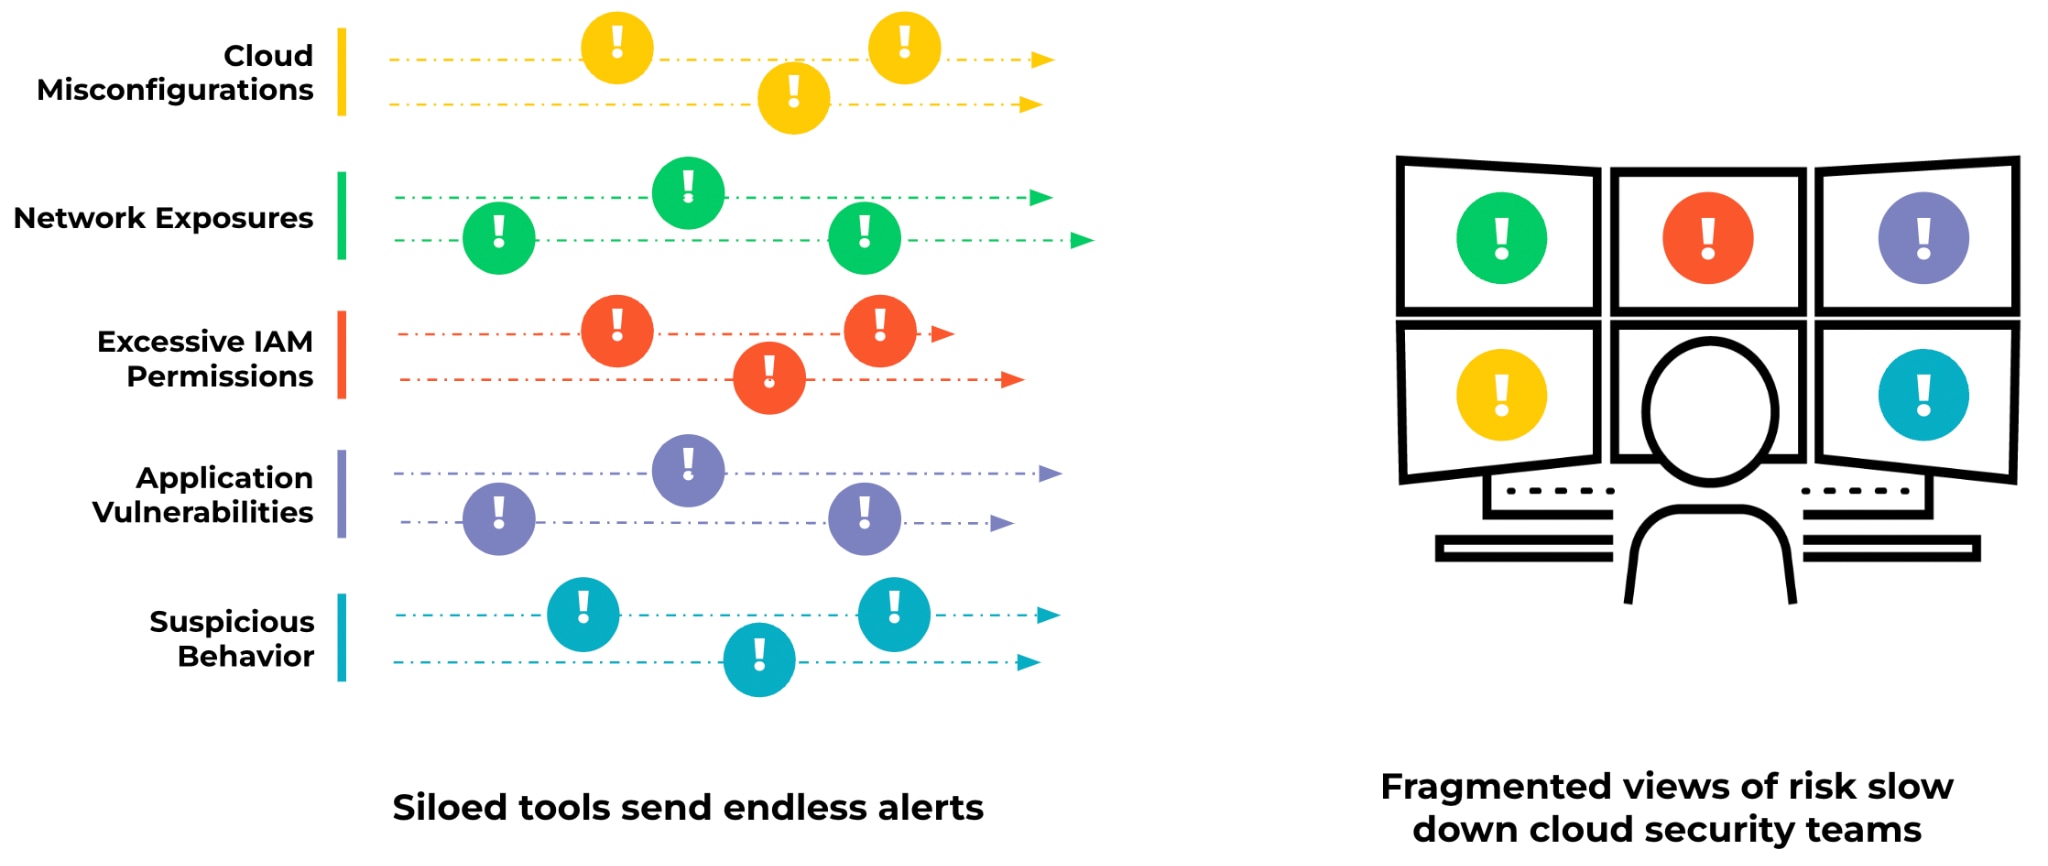 Endless alerts about individual signals don’t provide security teams with a comprehensive view of risk